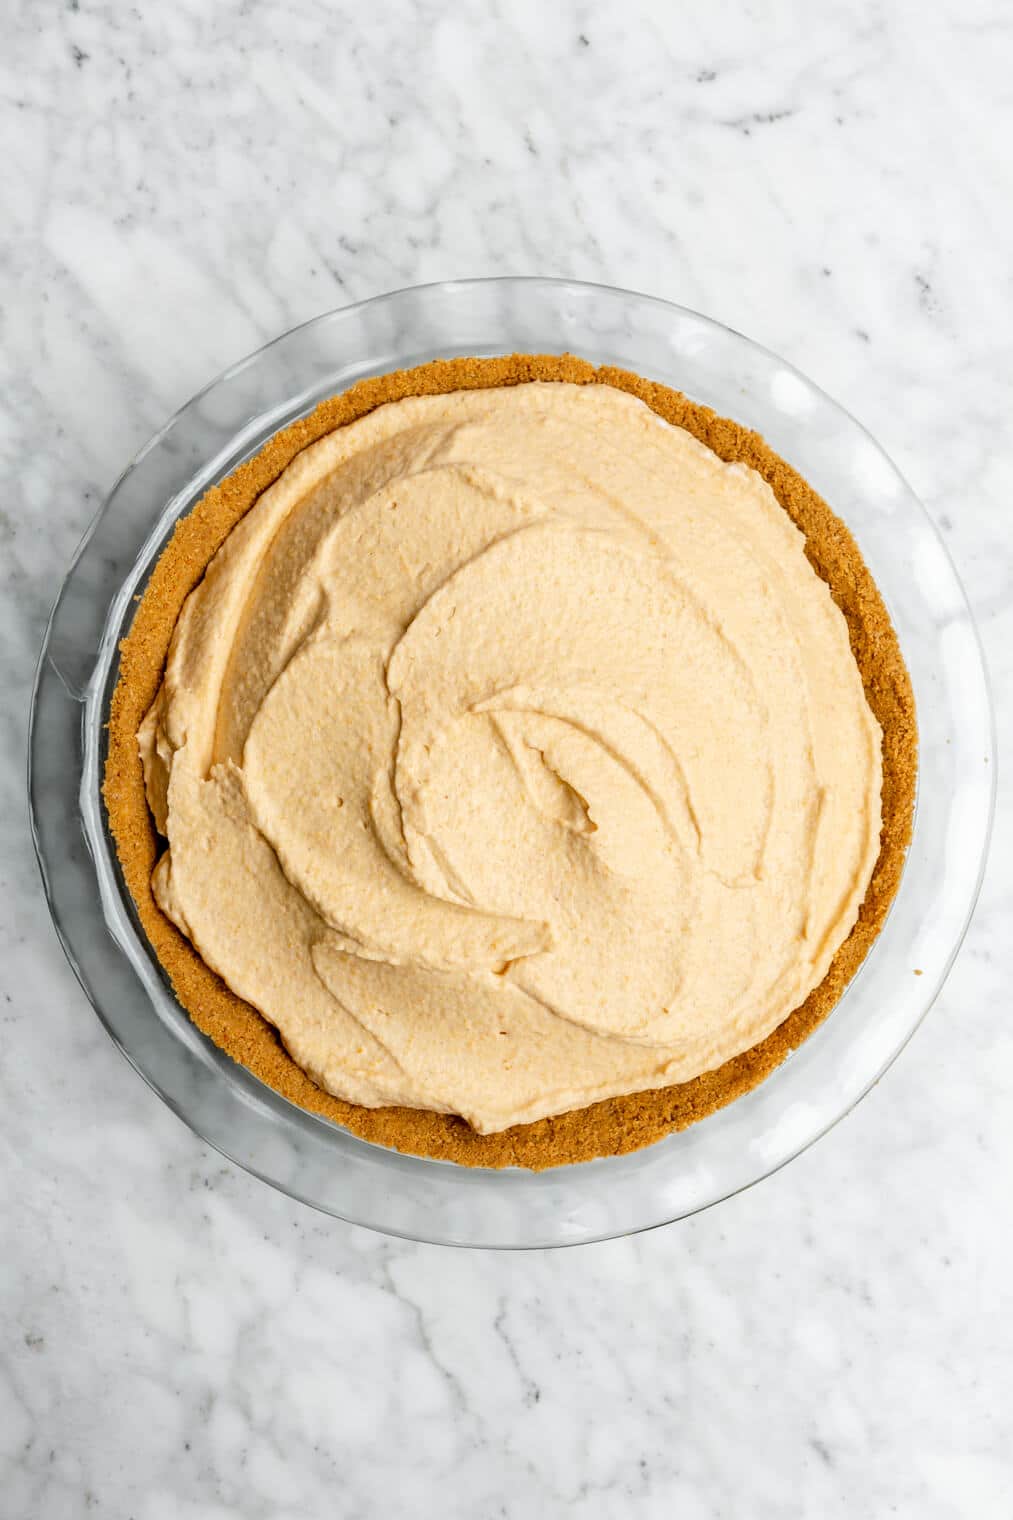 Pumpkin pie mousse with a graham cracker crust in a glass pie dish on a grey and white marble surface.